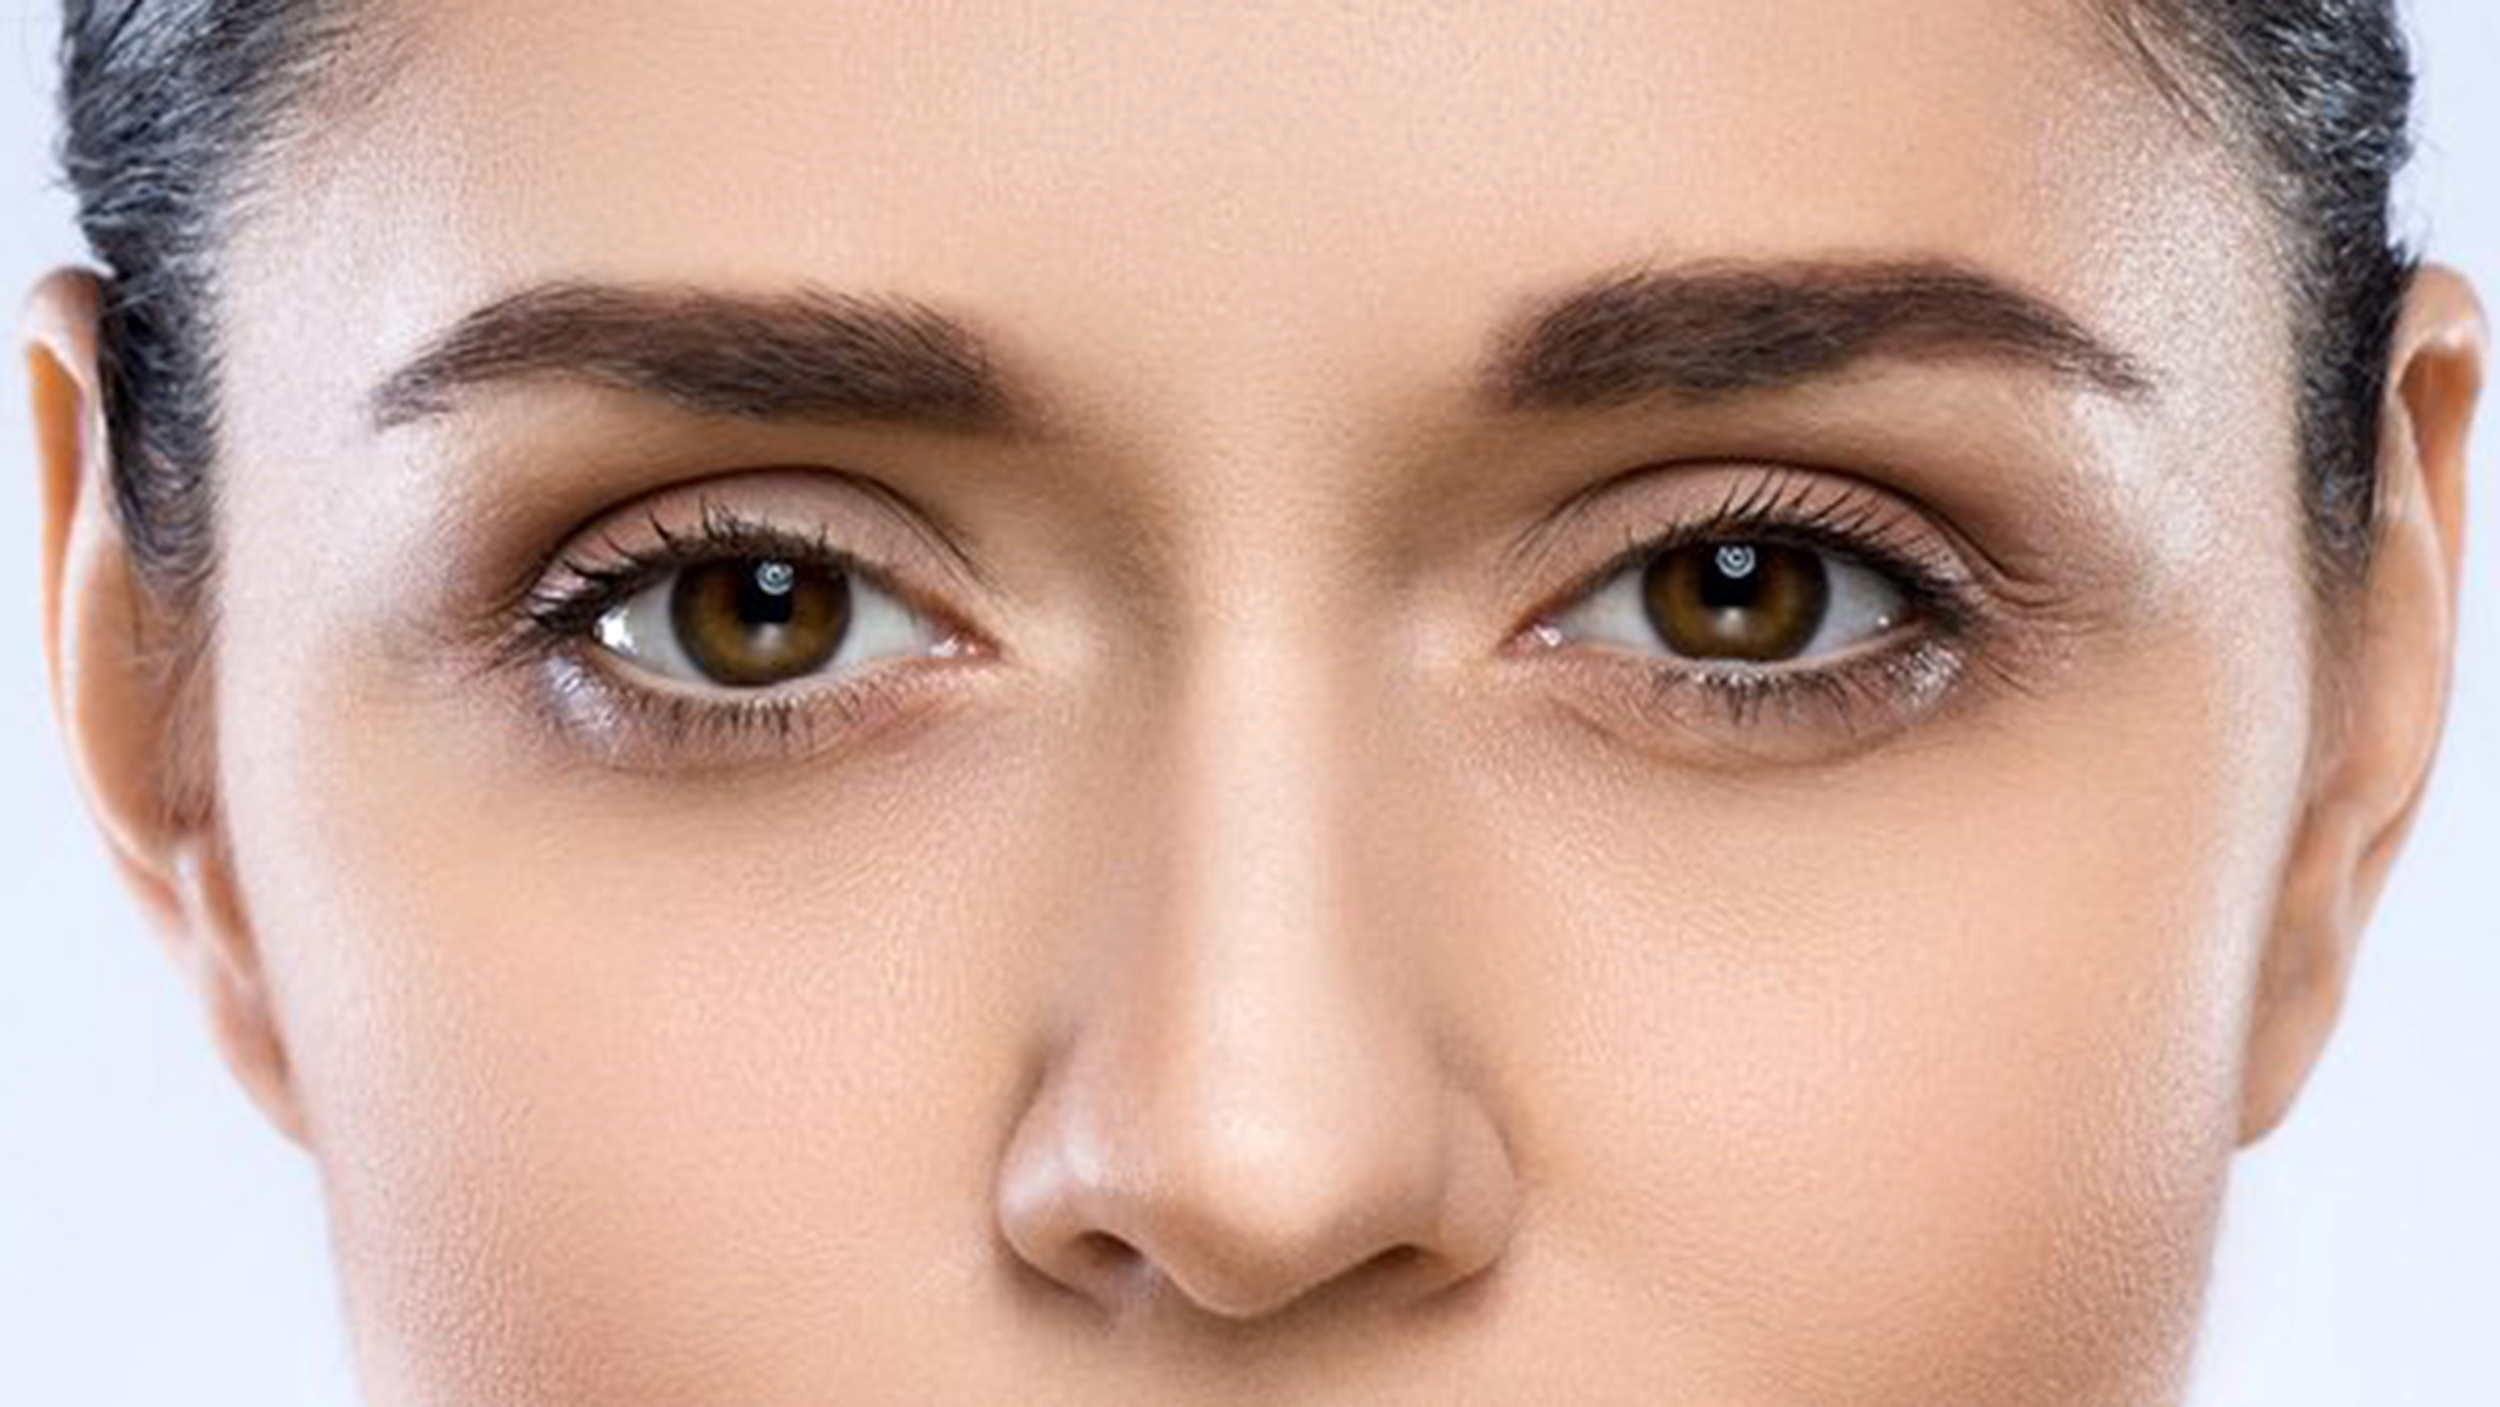 Eyebrow and Eyelash Treatments : Everything You Need to Know